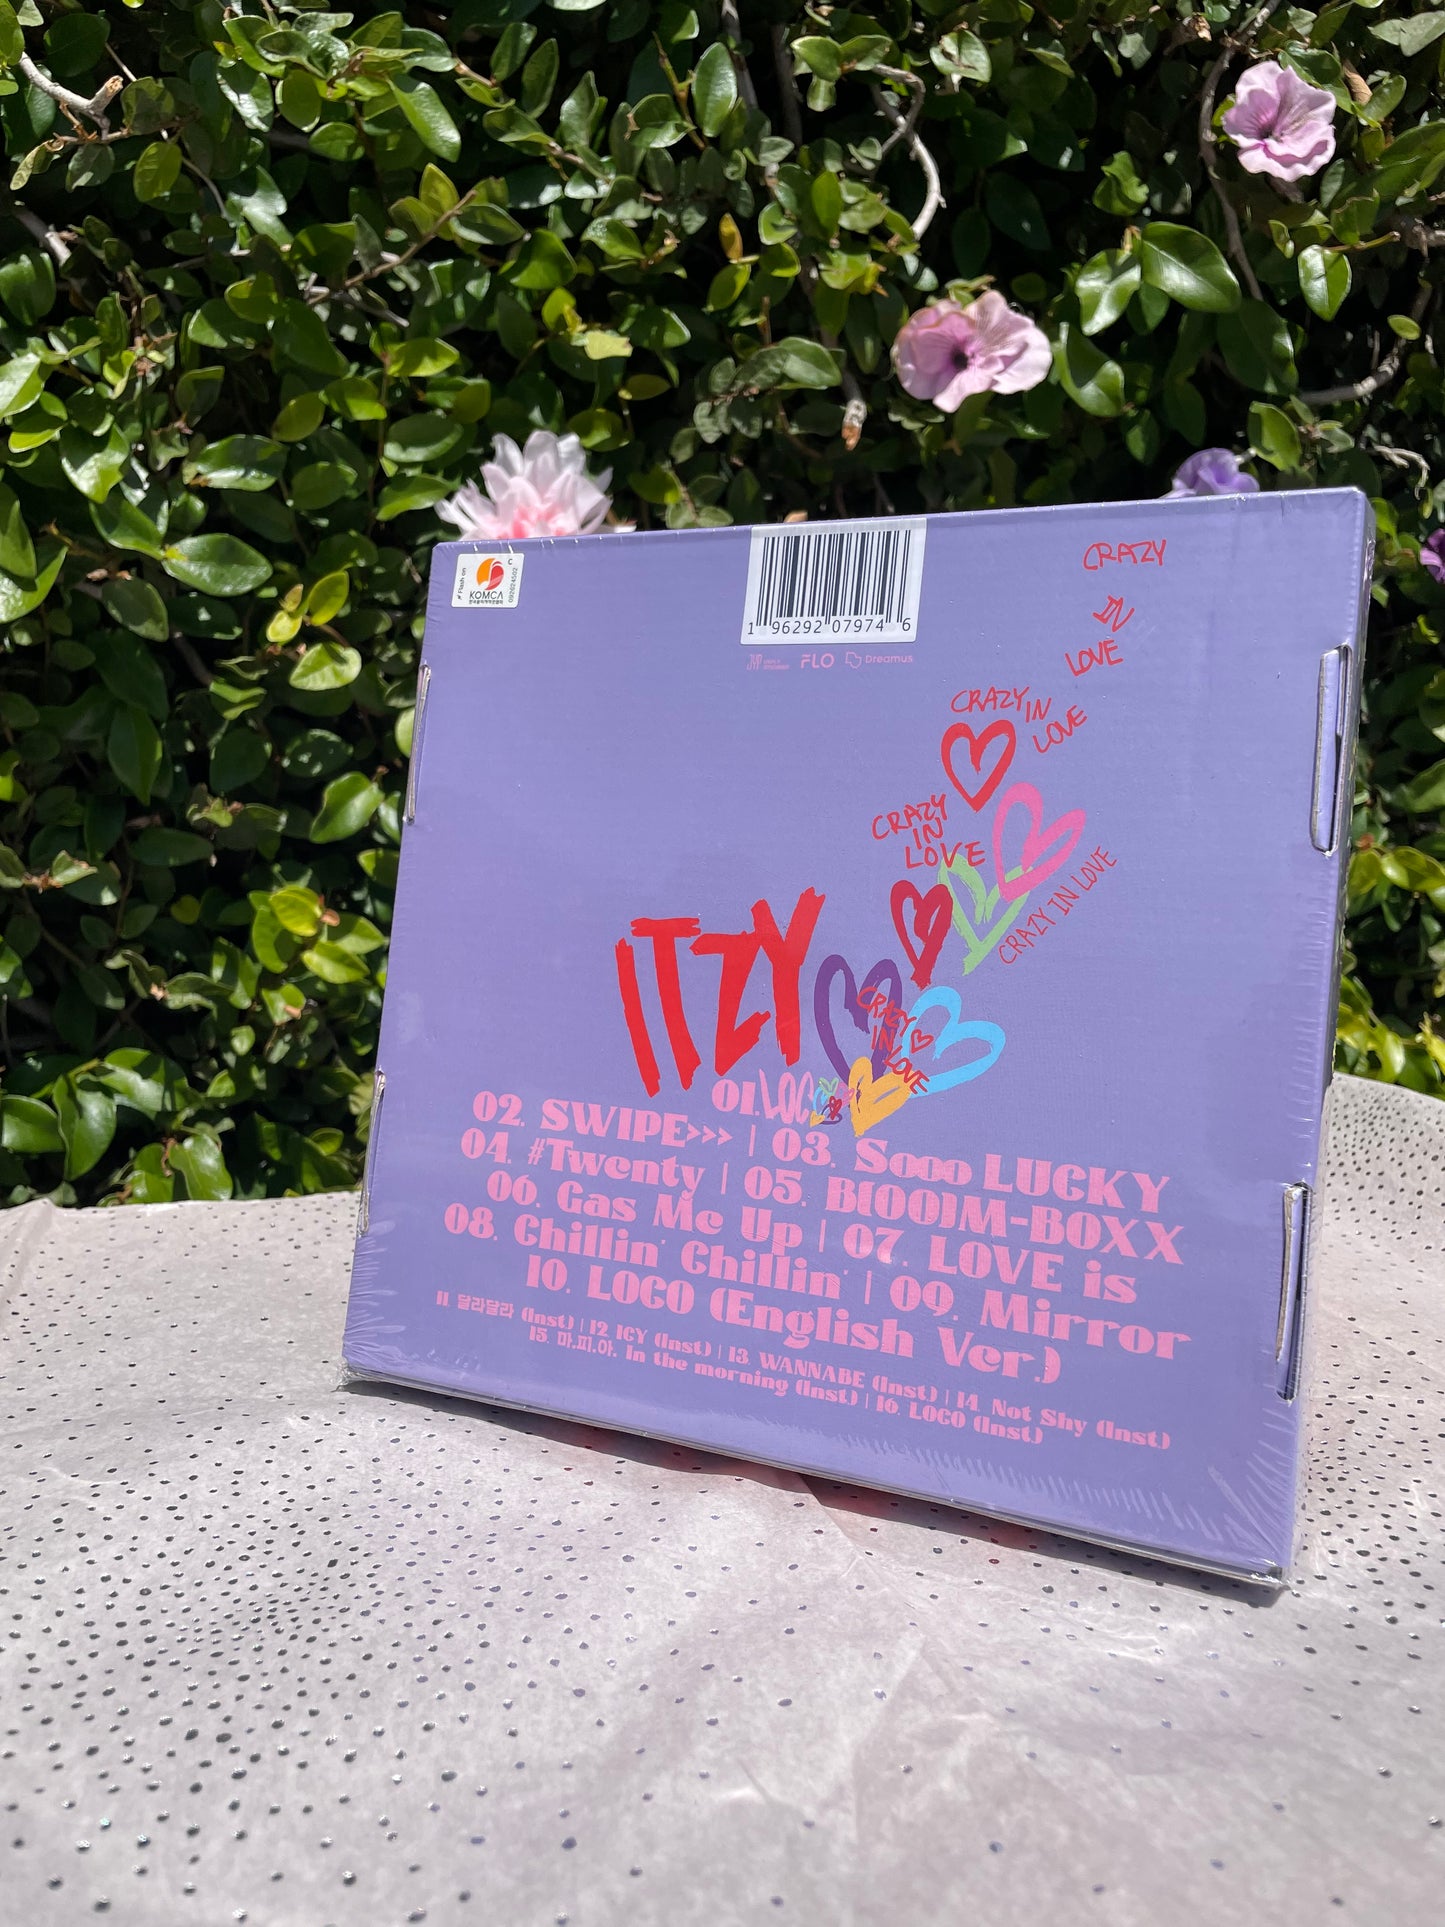 Itzy-CRAZY IN LOVE (CD)